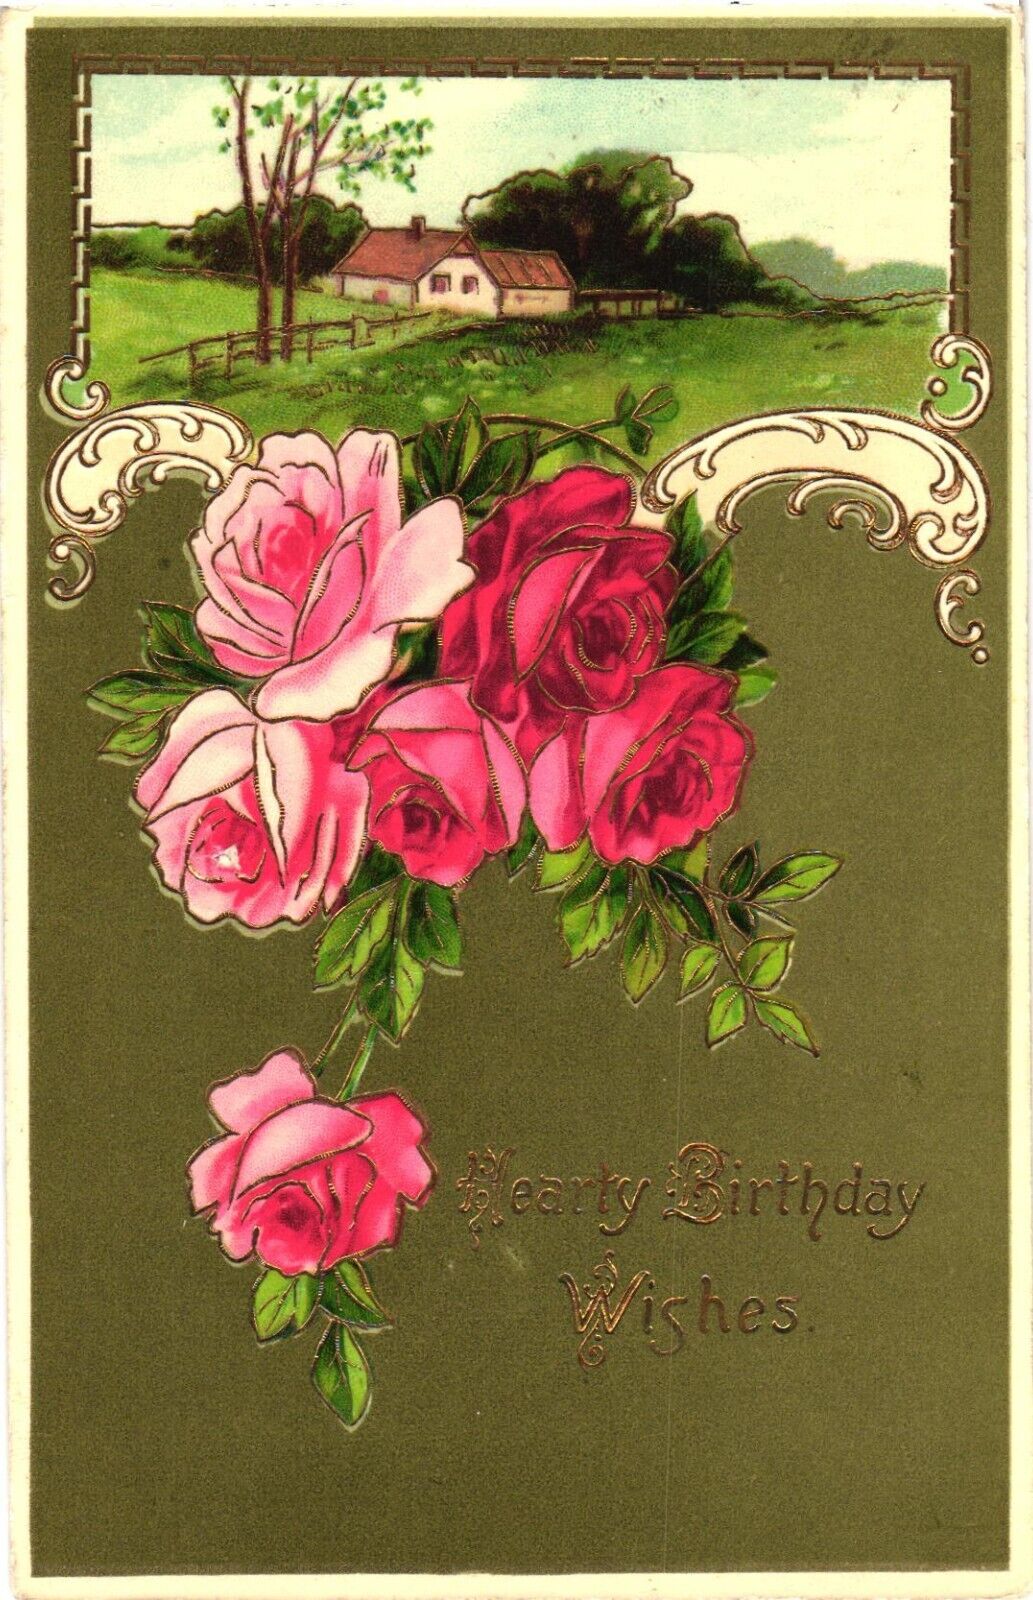 Scenic Home, Beautiful Pink and Red Roses, Hearty Birthday Wishes Postcard